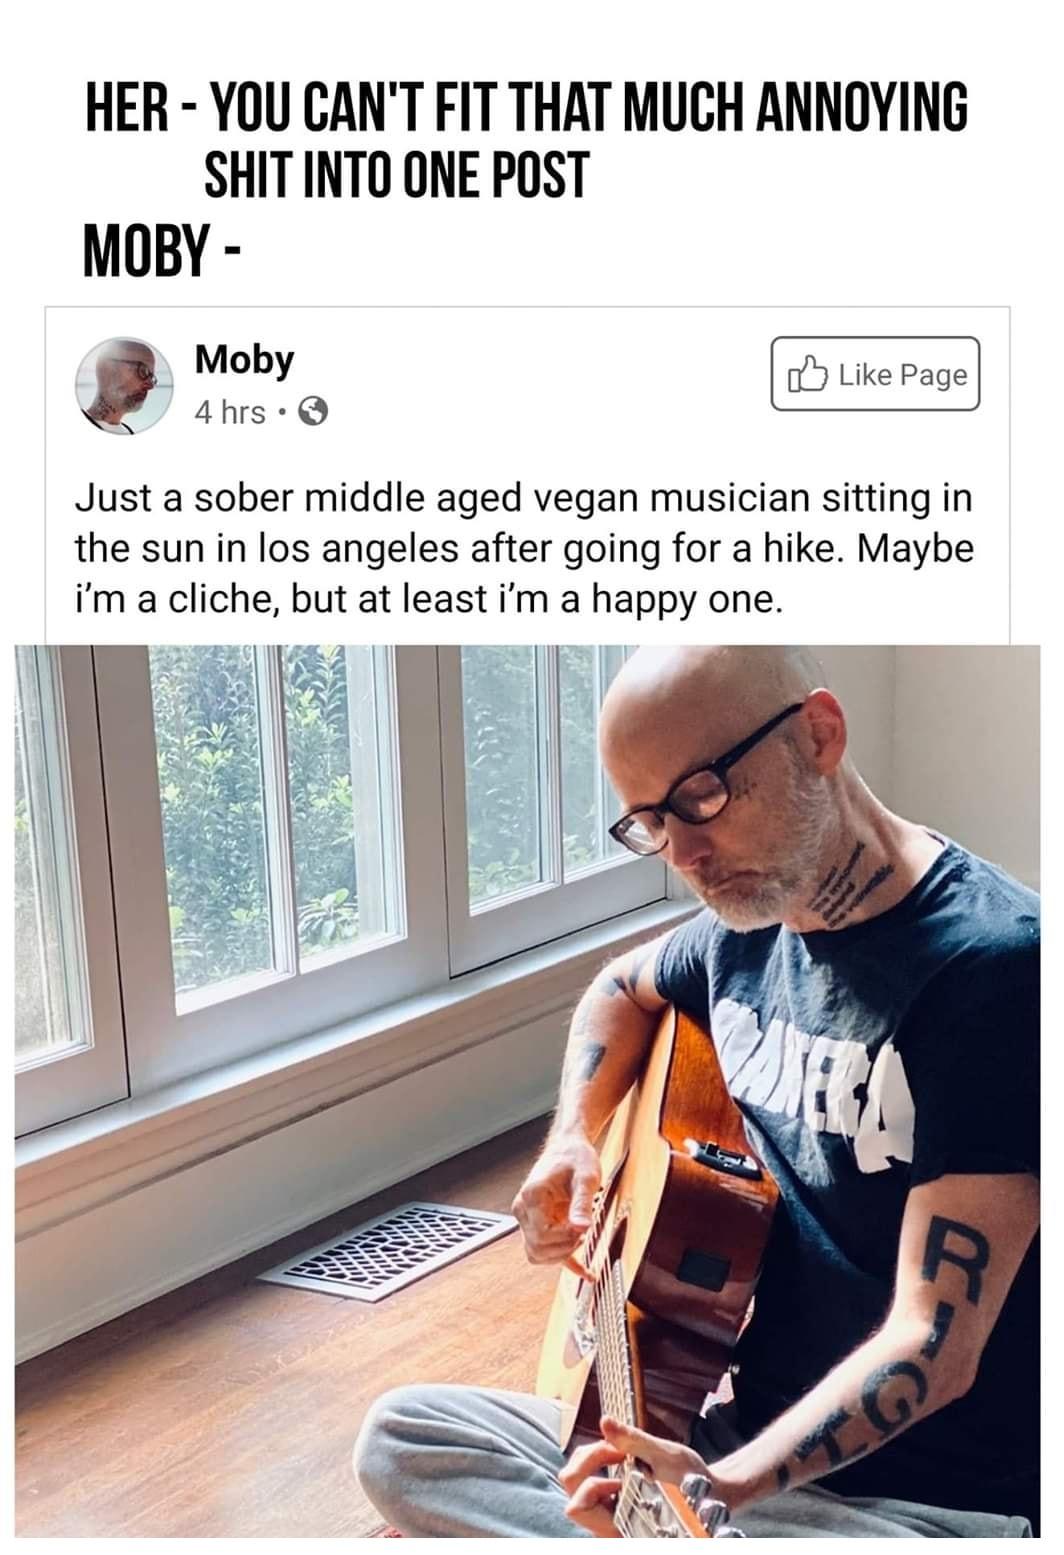 pics and memes daily dose - shoulder - Her You Can'T Fit That Much Annoying Shit Into One Post Moby Moby 4 hrs Page Just a sober middle aged vegan musician sitting in the sun in los angeles after going for a hike. Maybe i'm a cliche, but at least i'm a ha